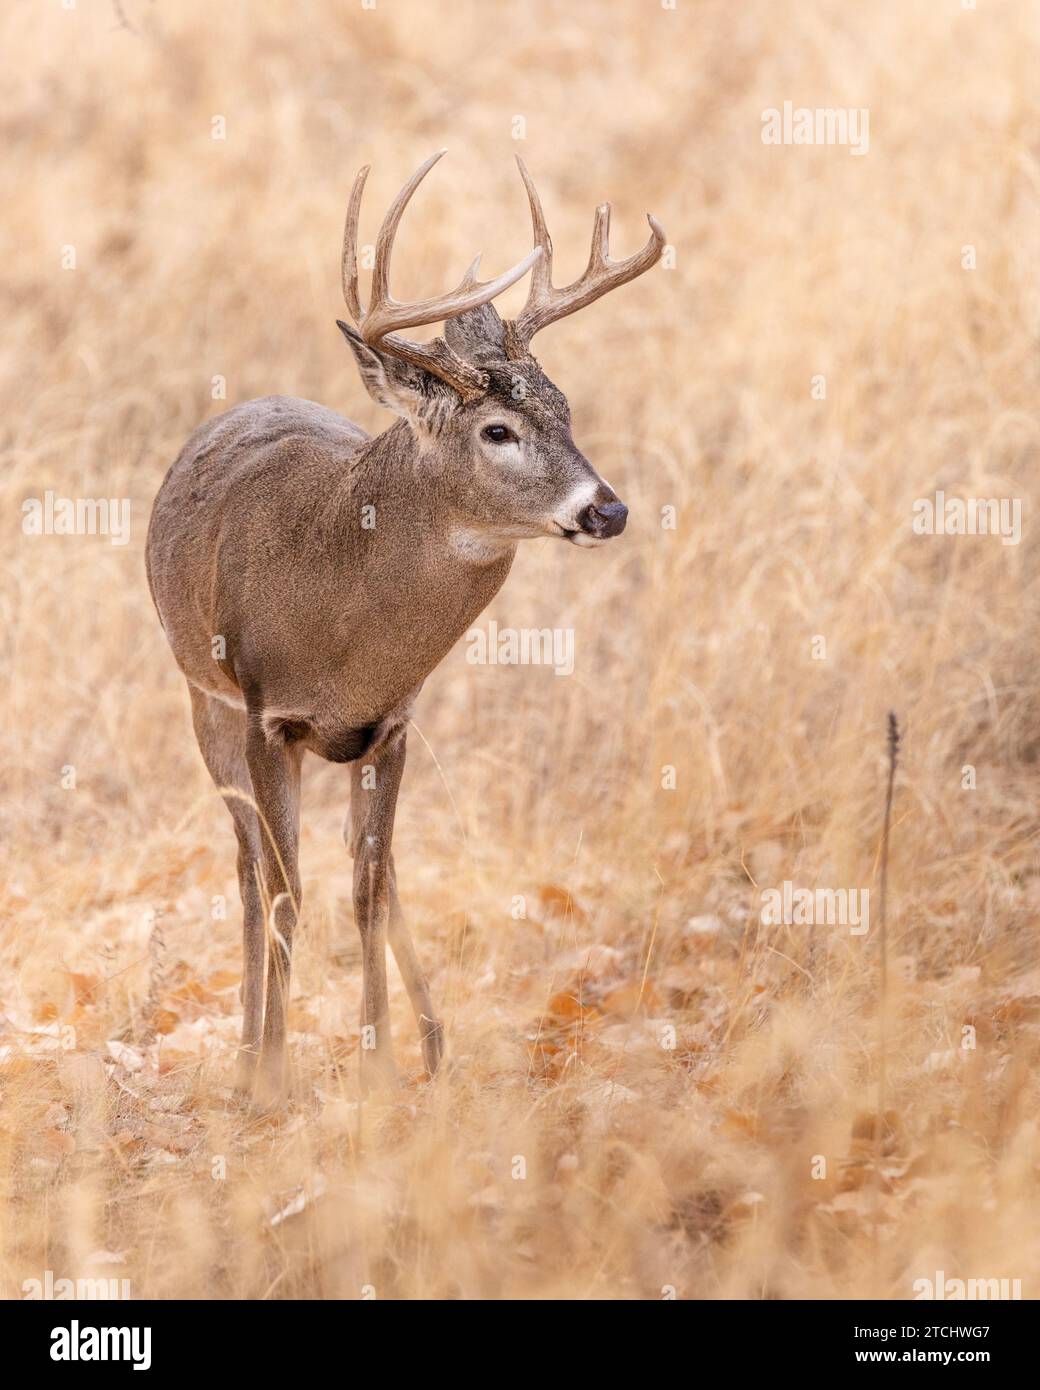 A majestic white-tailed deer with a large set of antlers and dark brown velvet covering the head and neck standing in a grassy meadow in the wild Stock Photo